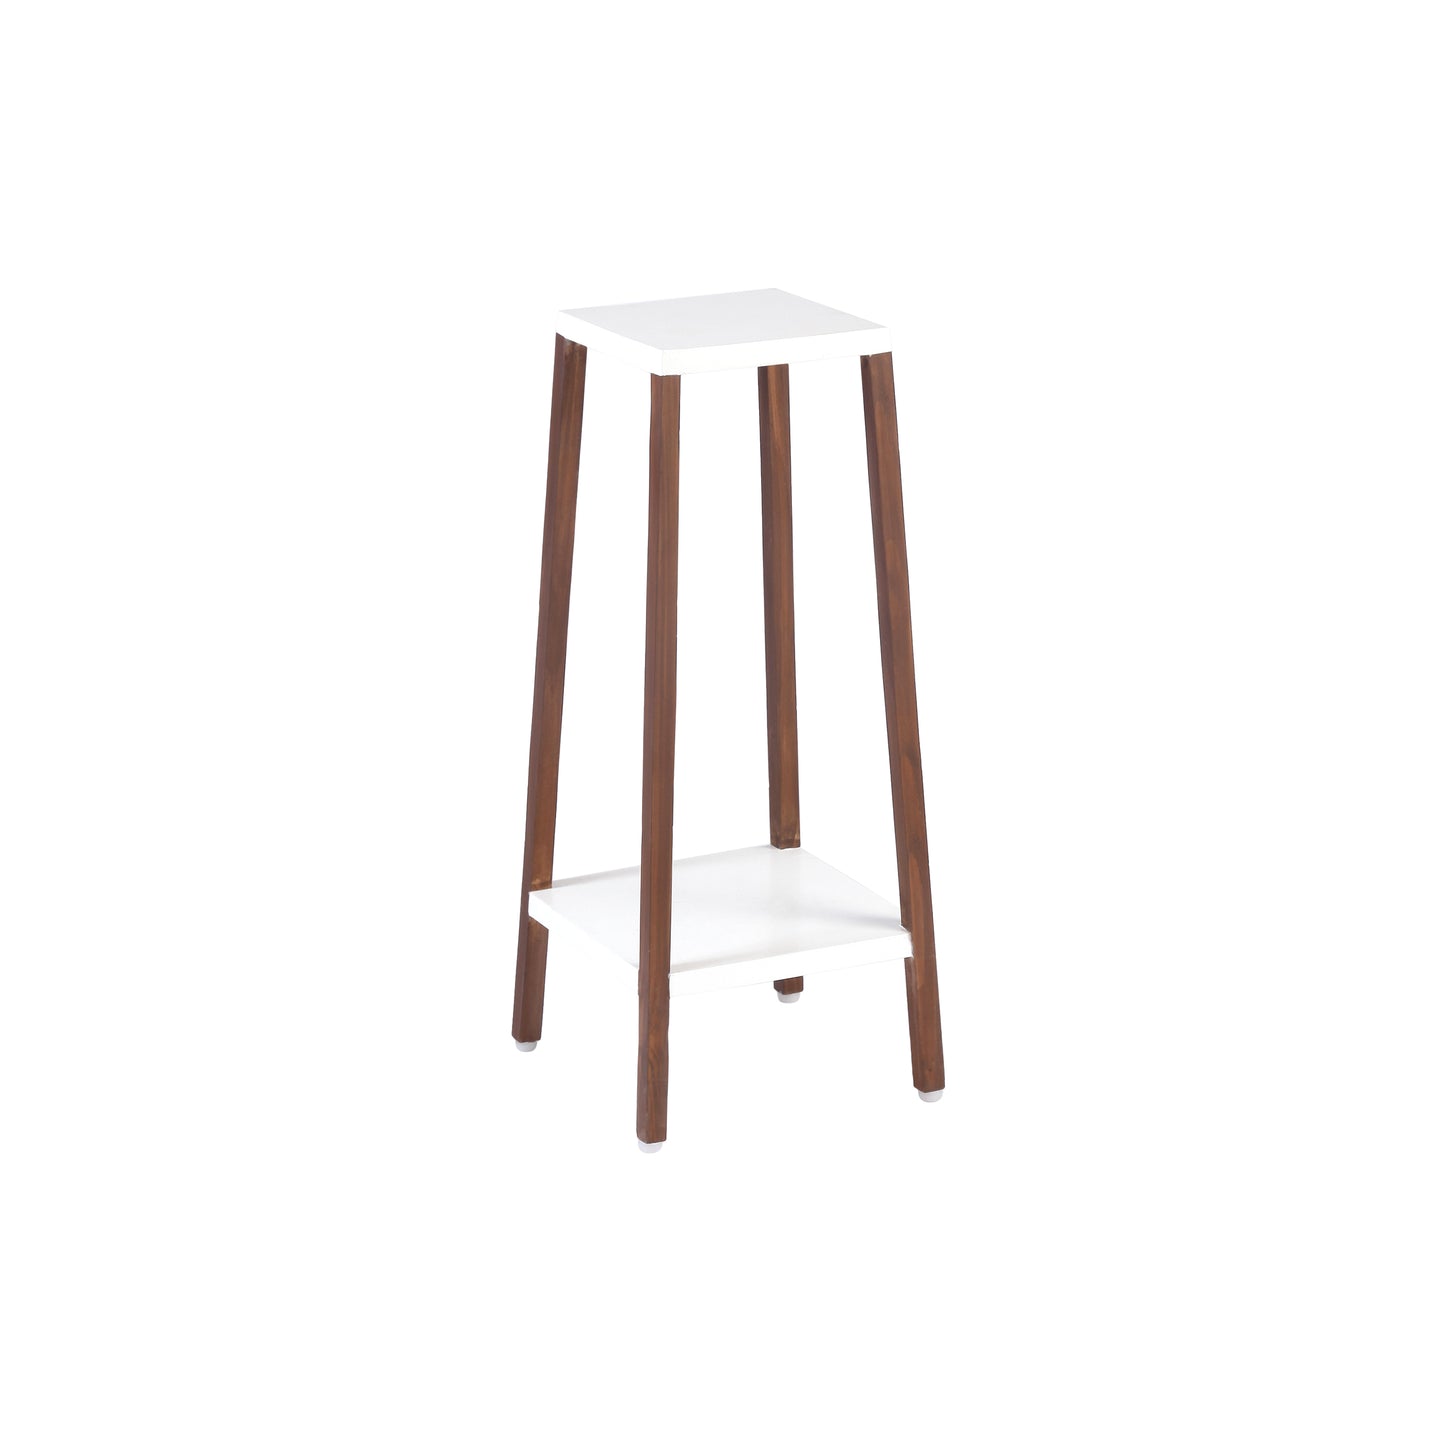 A Tiny Mistake Square Four Legged Tapering Two Tier Decorative Stand (Two Tiers) (White Base with Dark Legs)